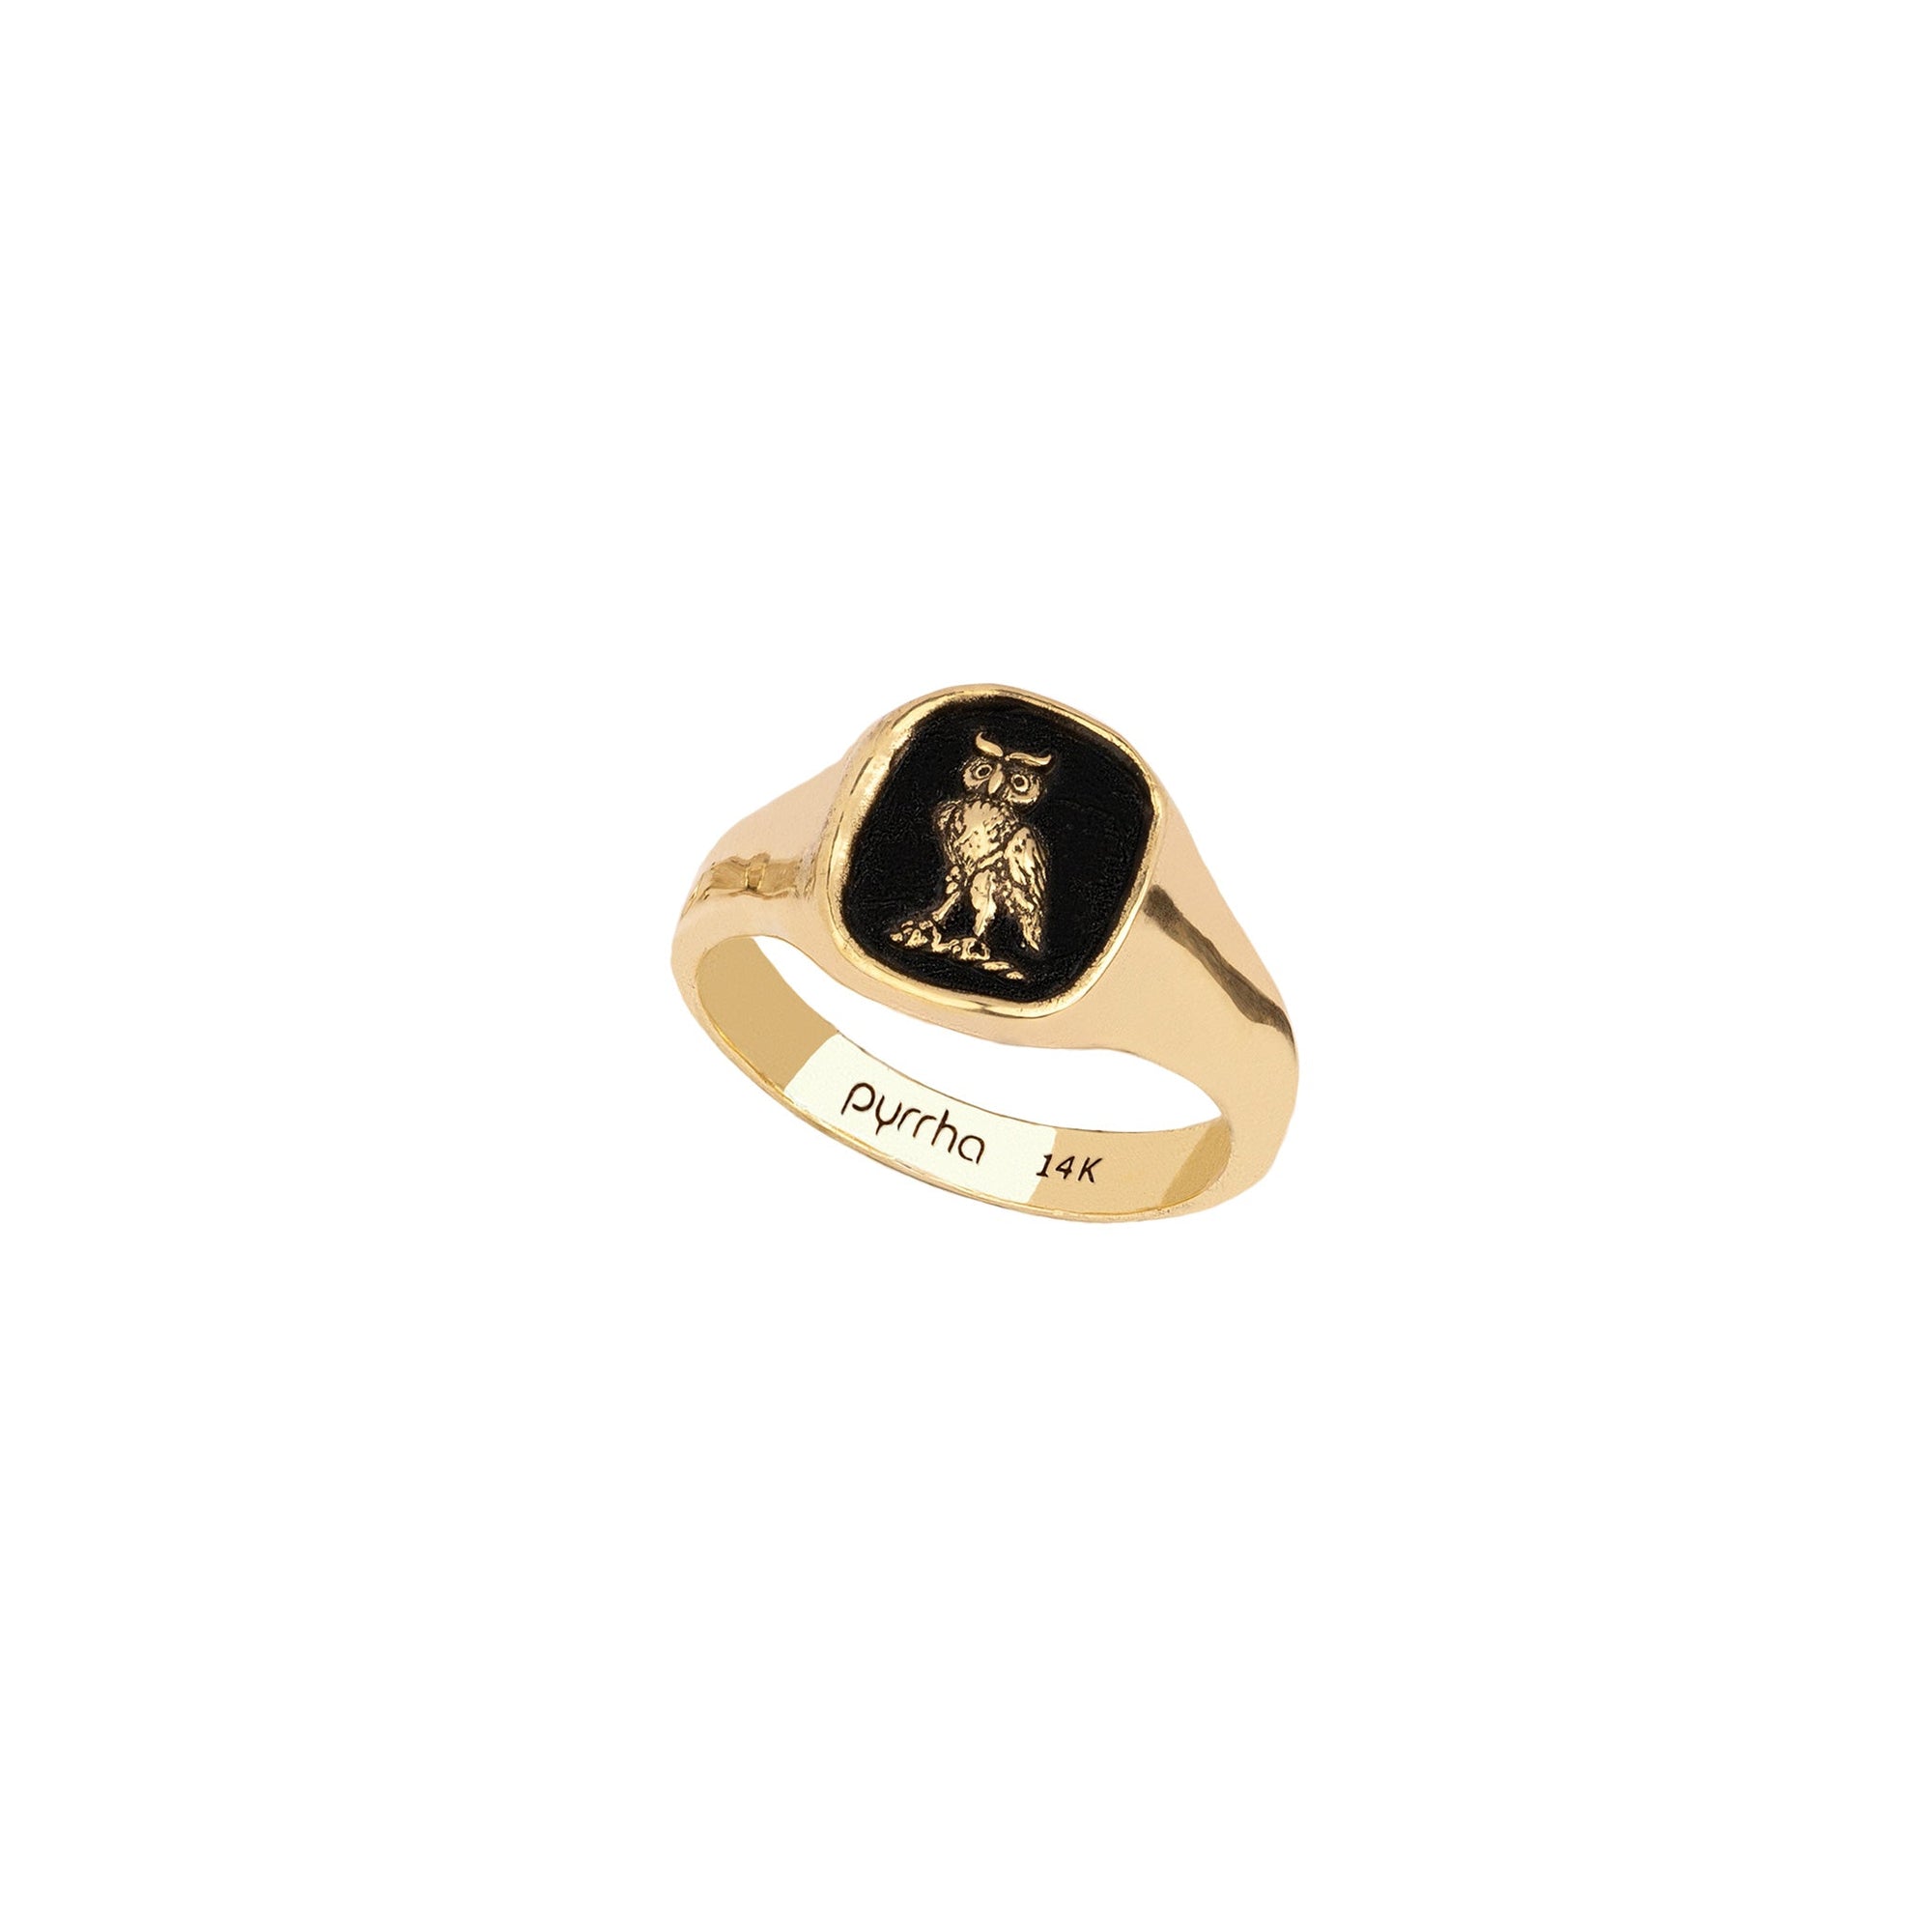 Watch Over Me 14K Gold Signet Ring